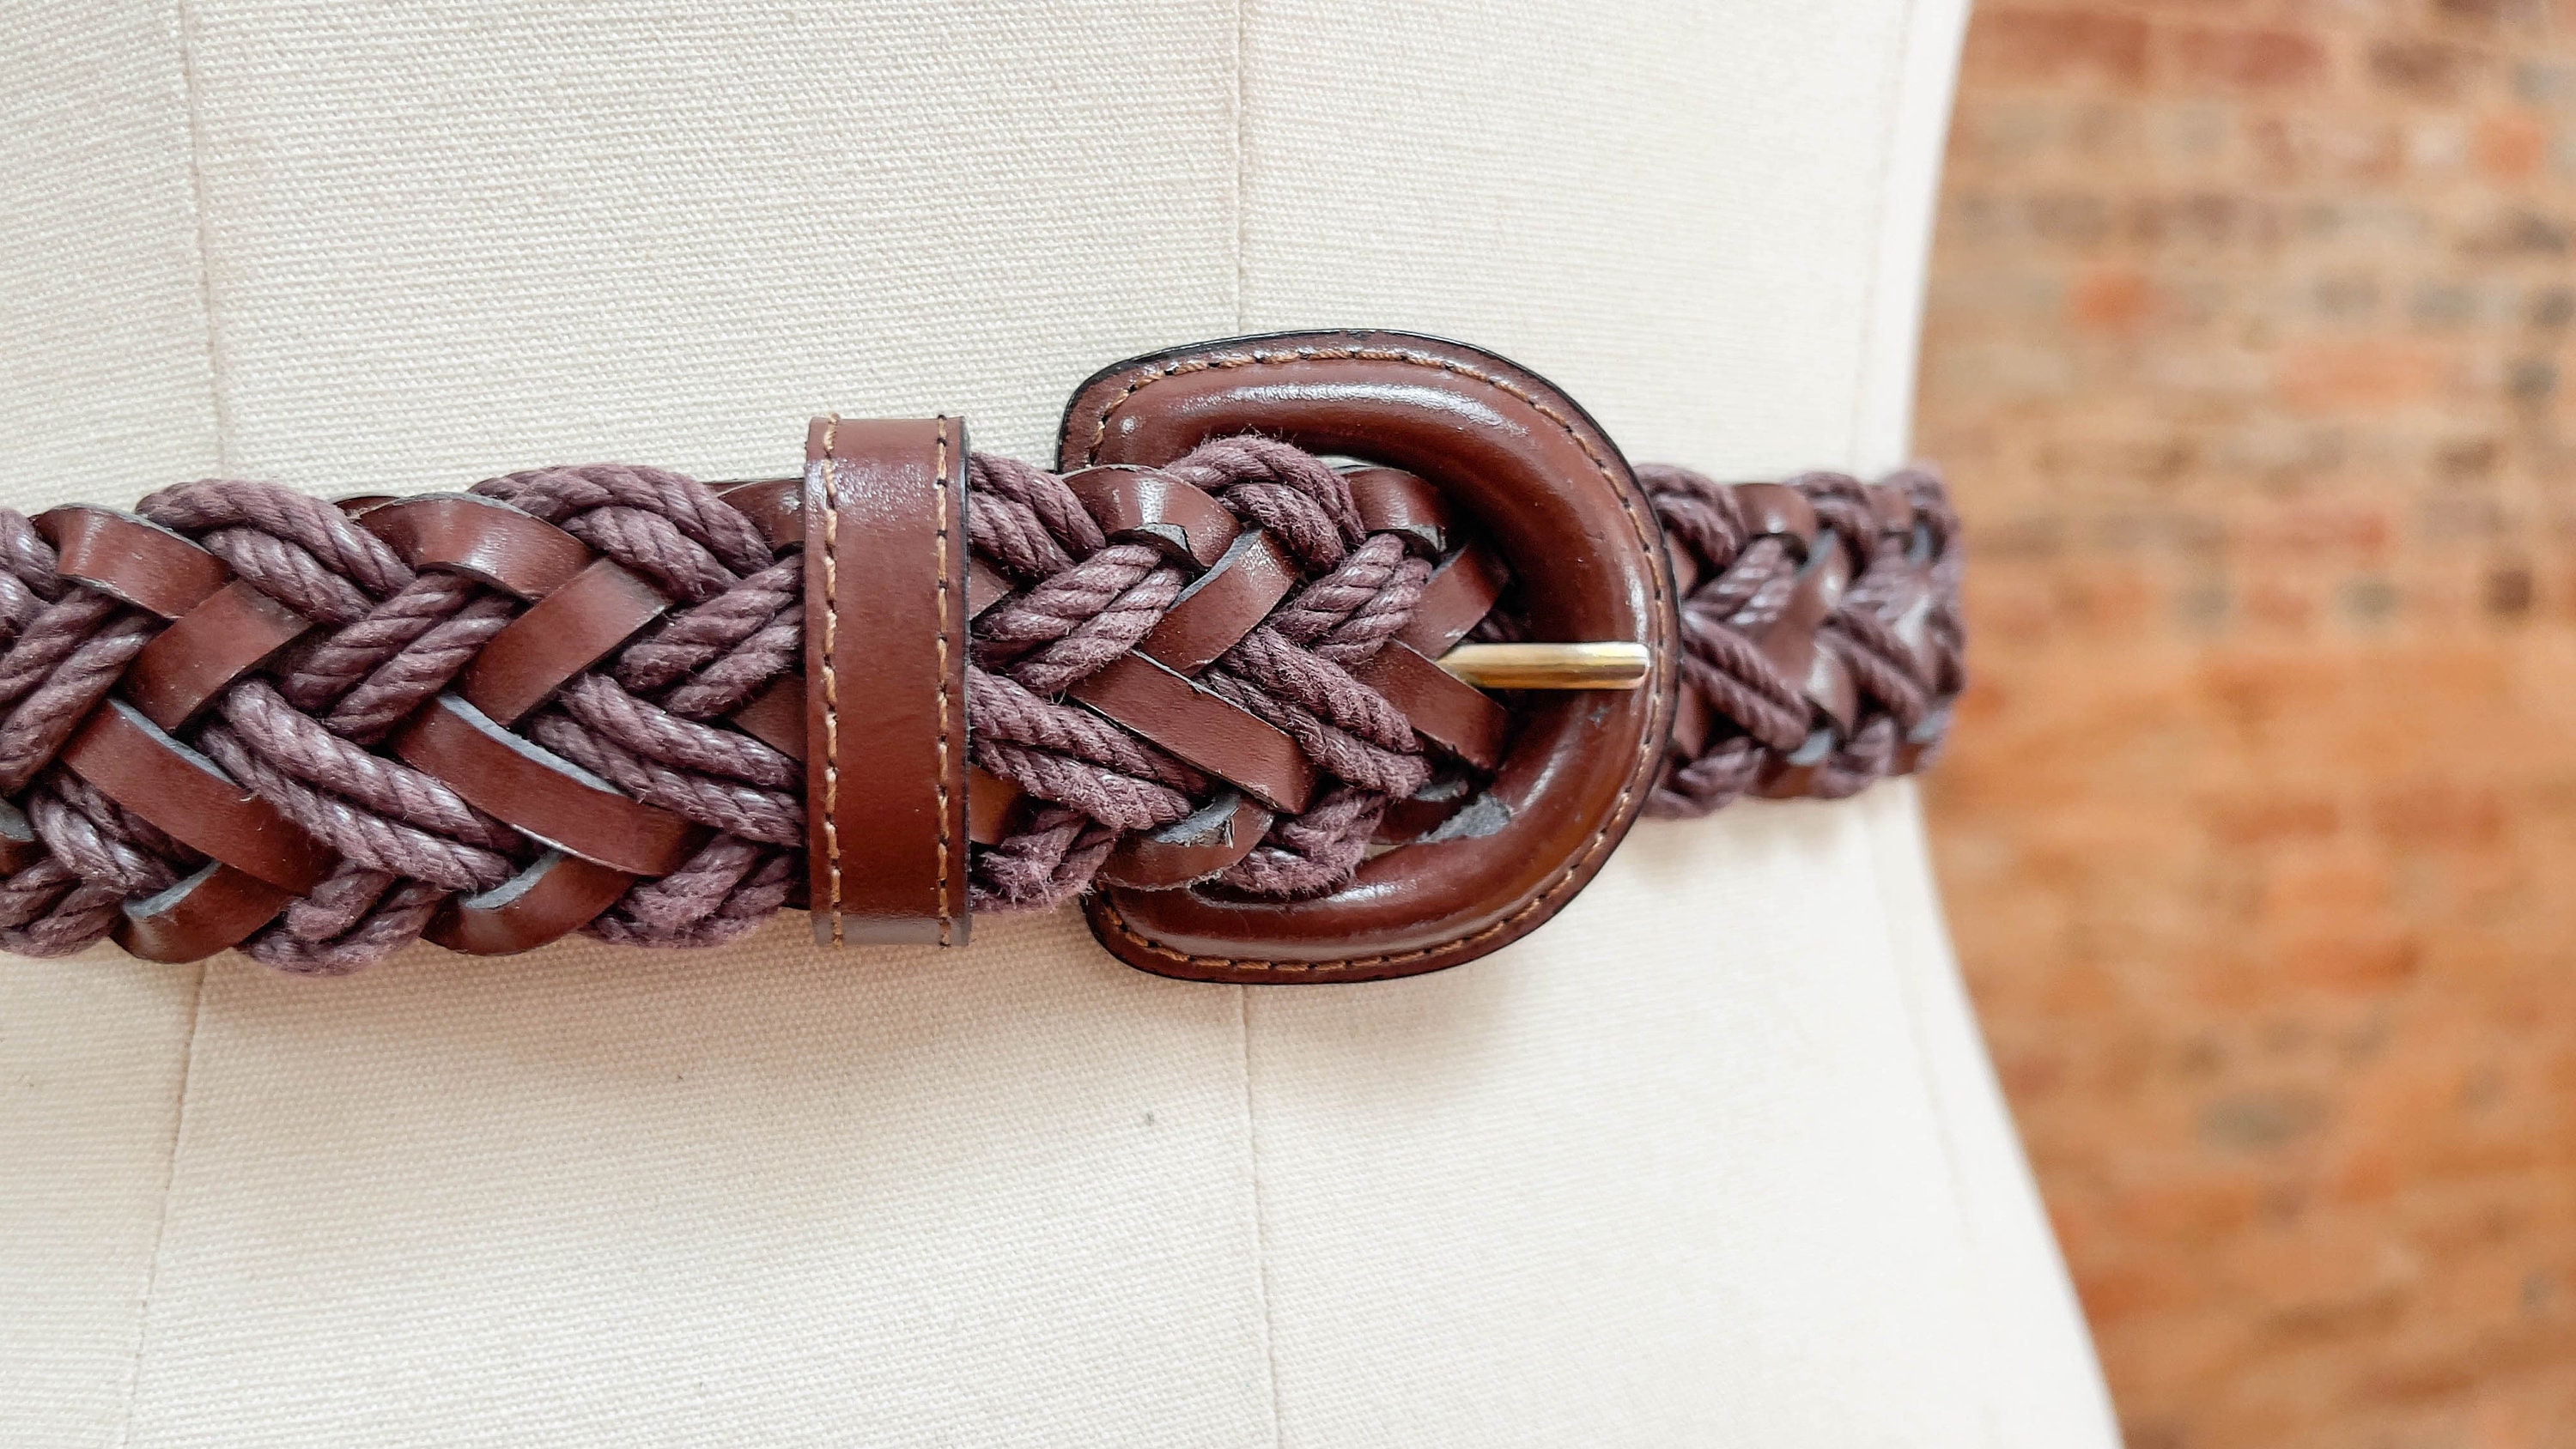 Brown Braided Leather Belt 90s Vintage Woven Leather Belt - Etsy